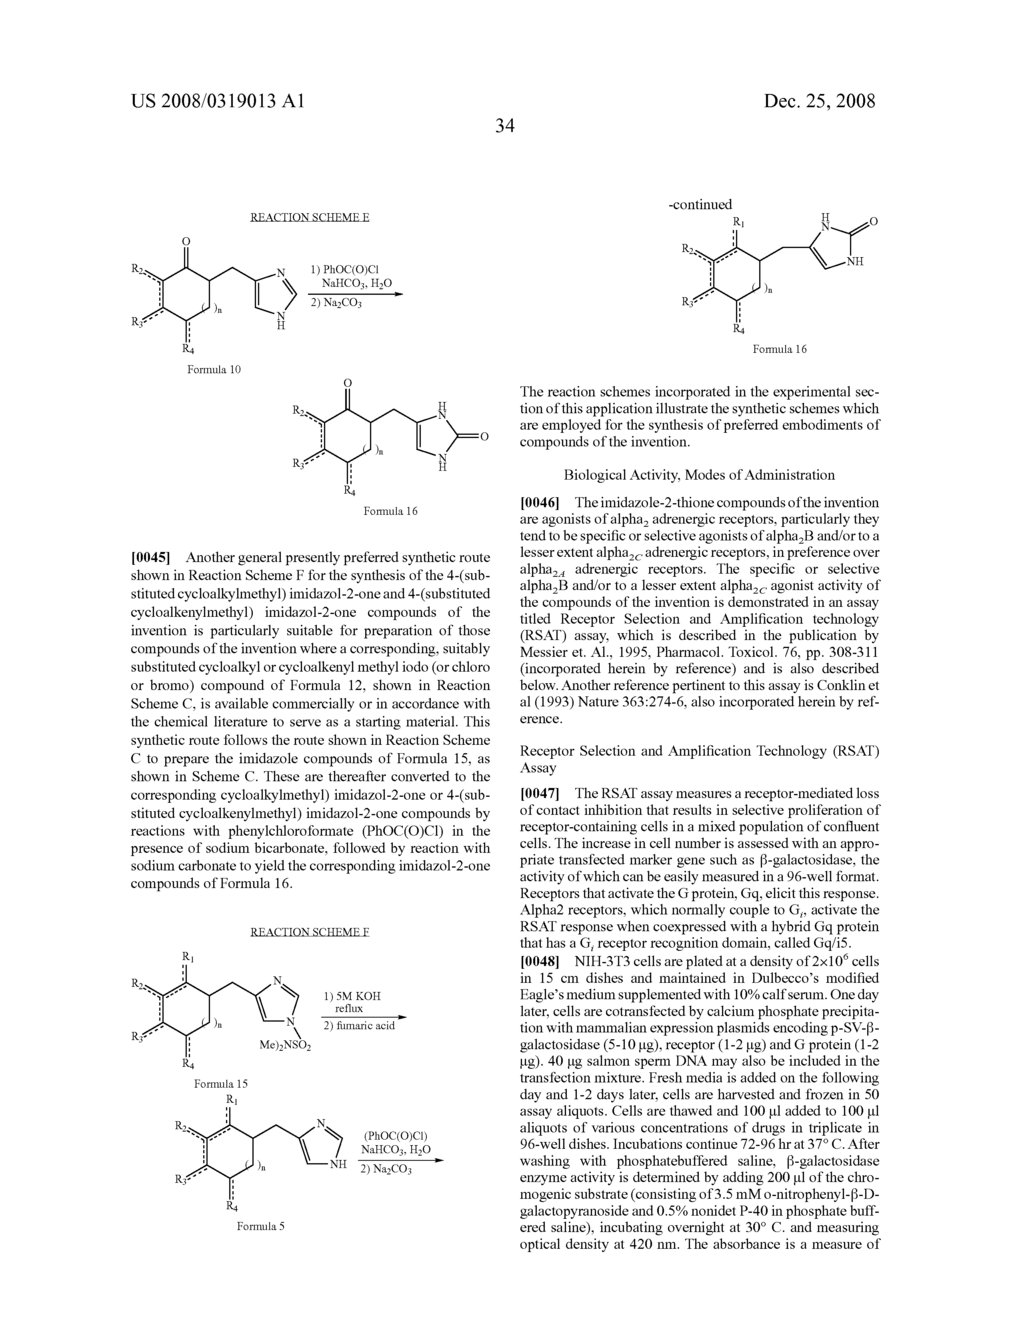 4-(SUBSTITUTED CYCLOALKYLMETHYL) IMIDAZOLE-2-THIONES, 4-(SUBSTITUTED CYCLOALKENYLMETHYL) IMIDAZOLE-2-THIONES, 4-(SUBSTITUTED CYCLOALKYLMETHYL) IMIDAZOLE-2-ONES AND, 4-(SUBSTITUTED CYCLOALKYLMETHYL) IMIDAZOLE-2-ONES AND RELATED COMPOUNDS - diagram, schematic, and image 35